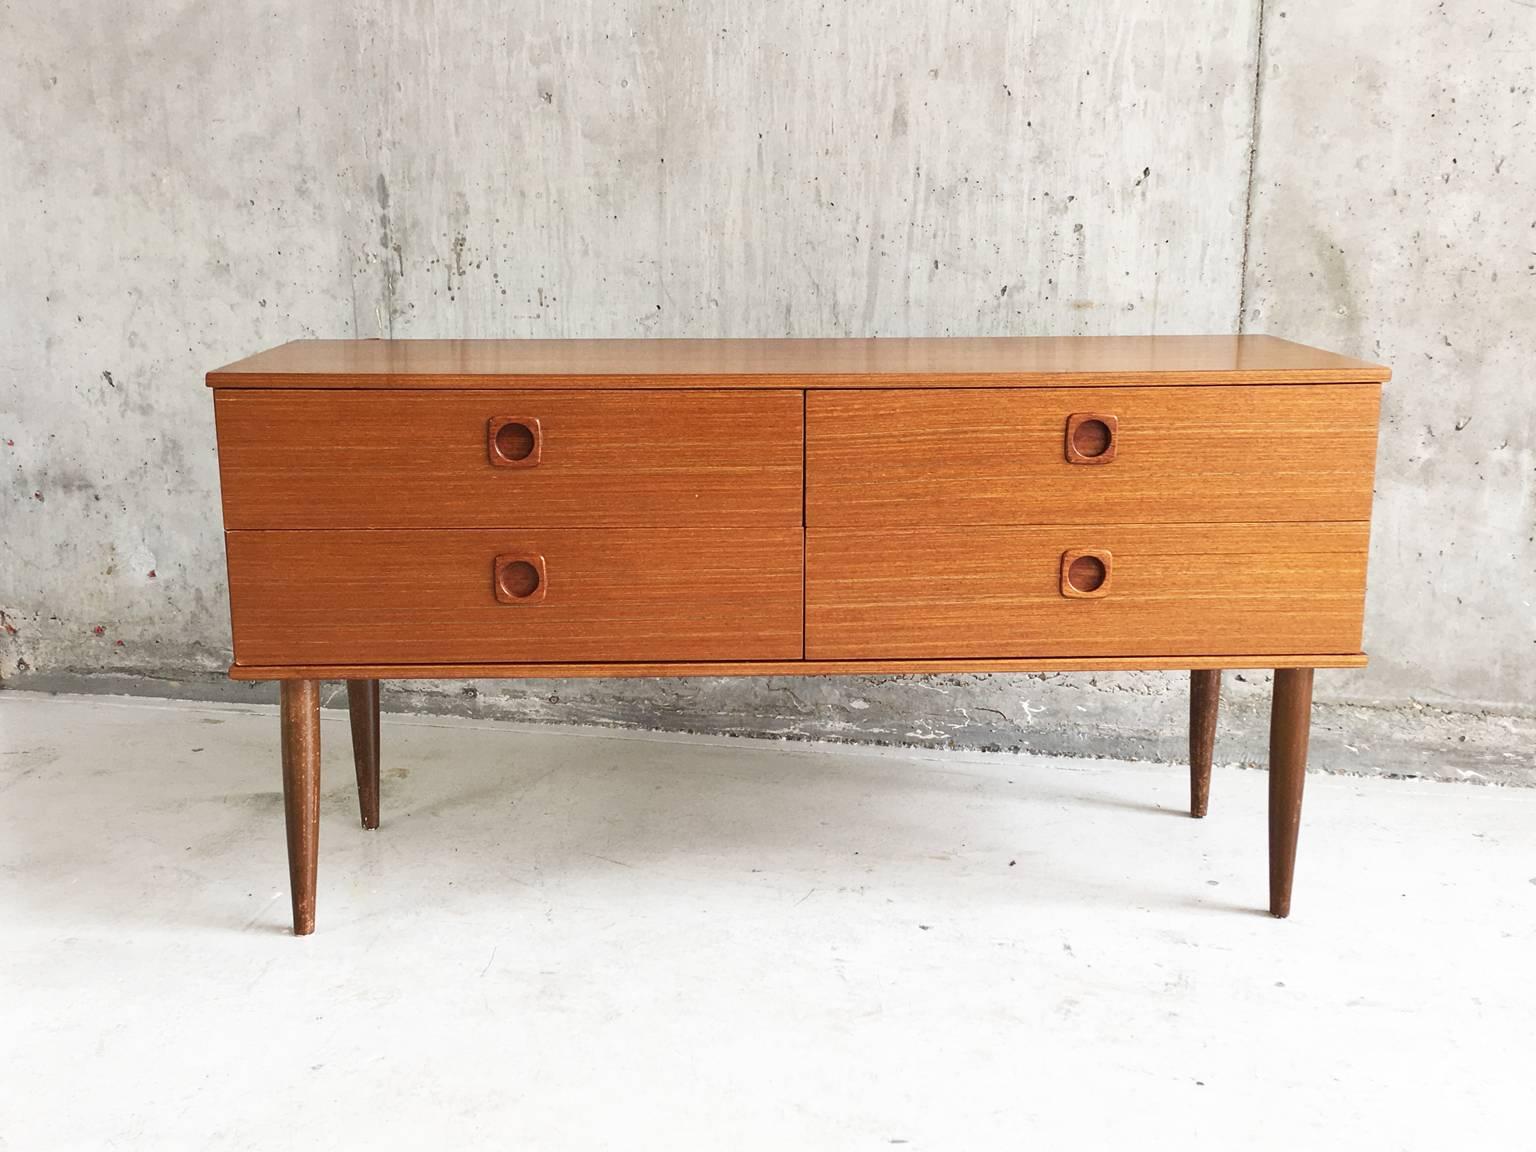 1970s Mid-Century Teak Schreiber Chest of Drawers with Recessed Draw Pulls In Good Condition For Sale In London, GB